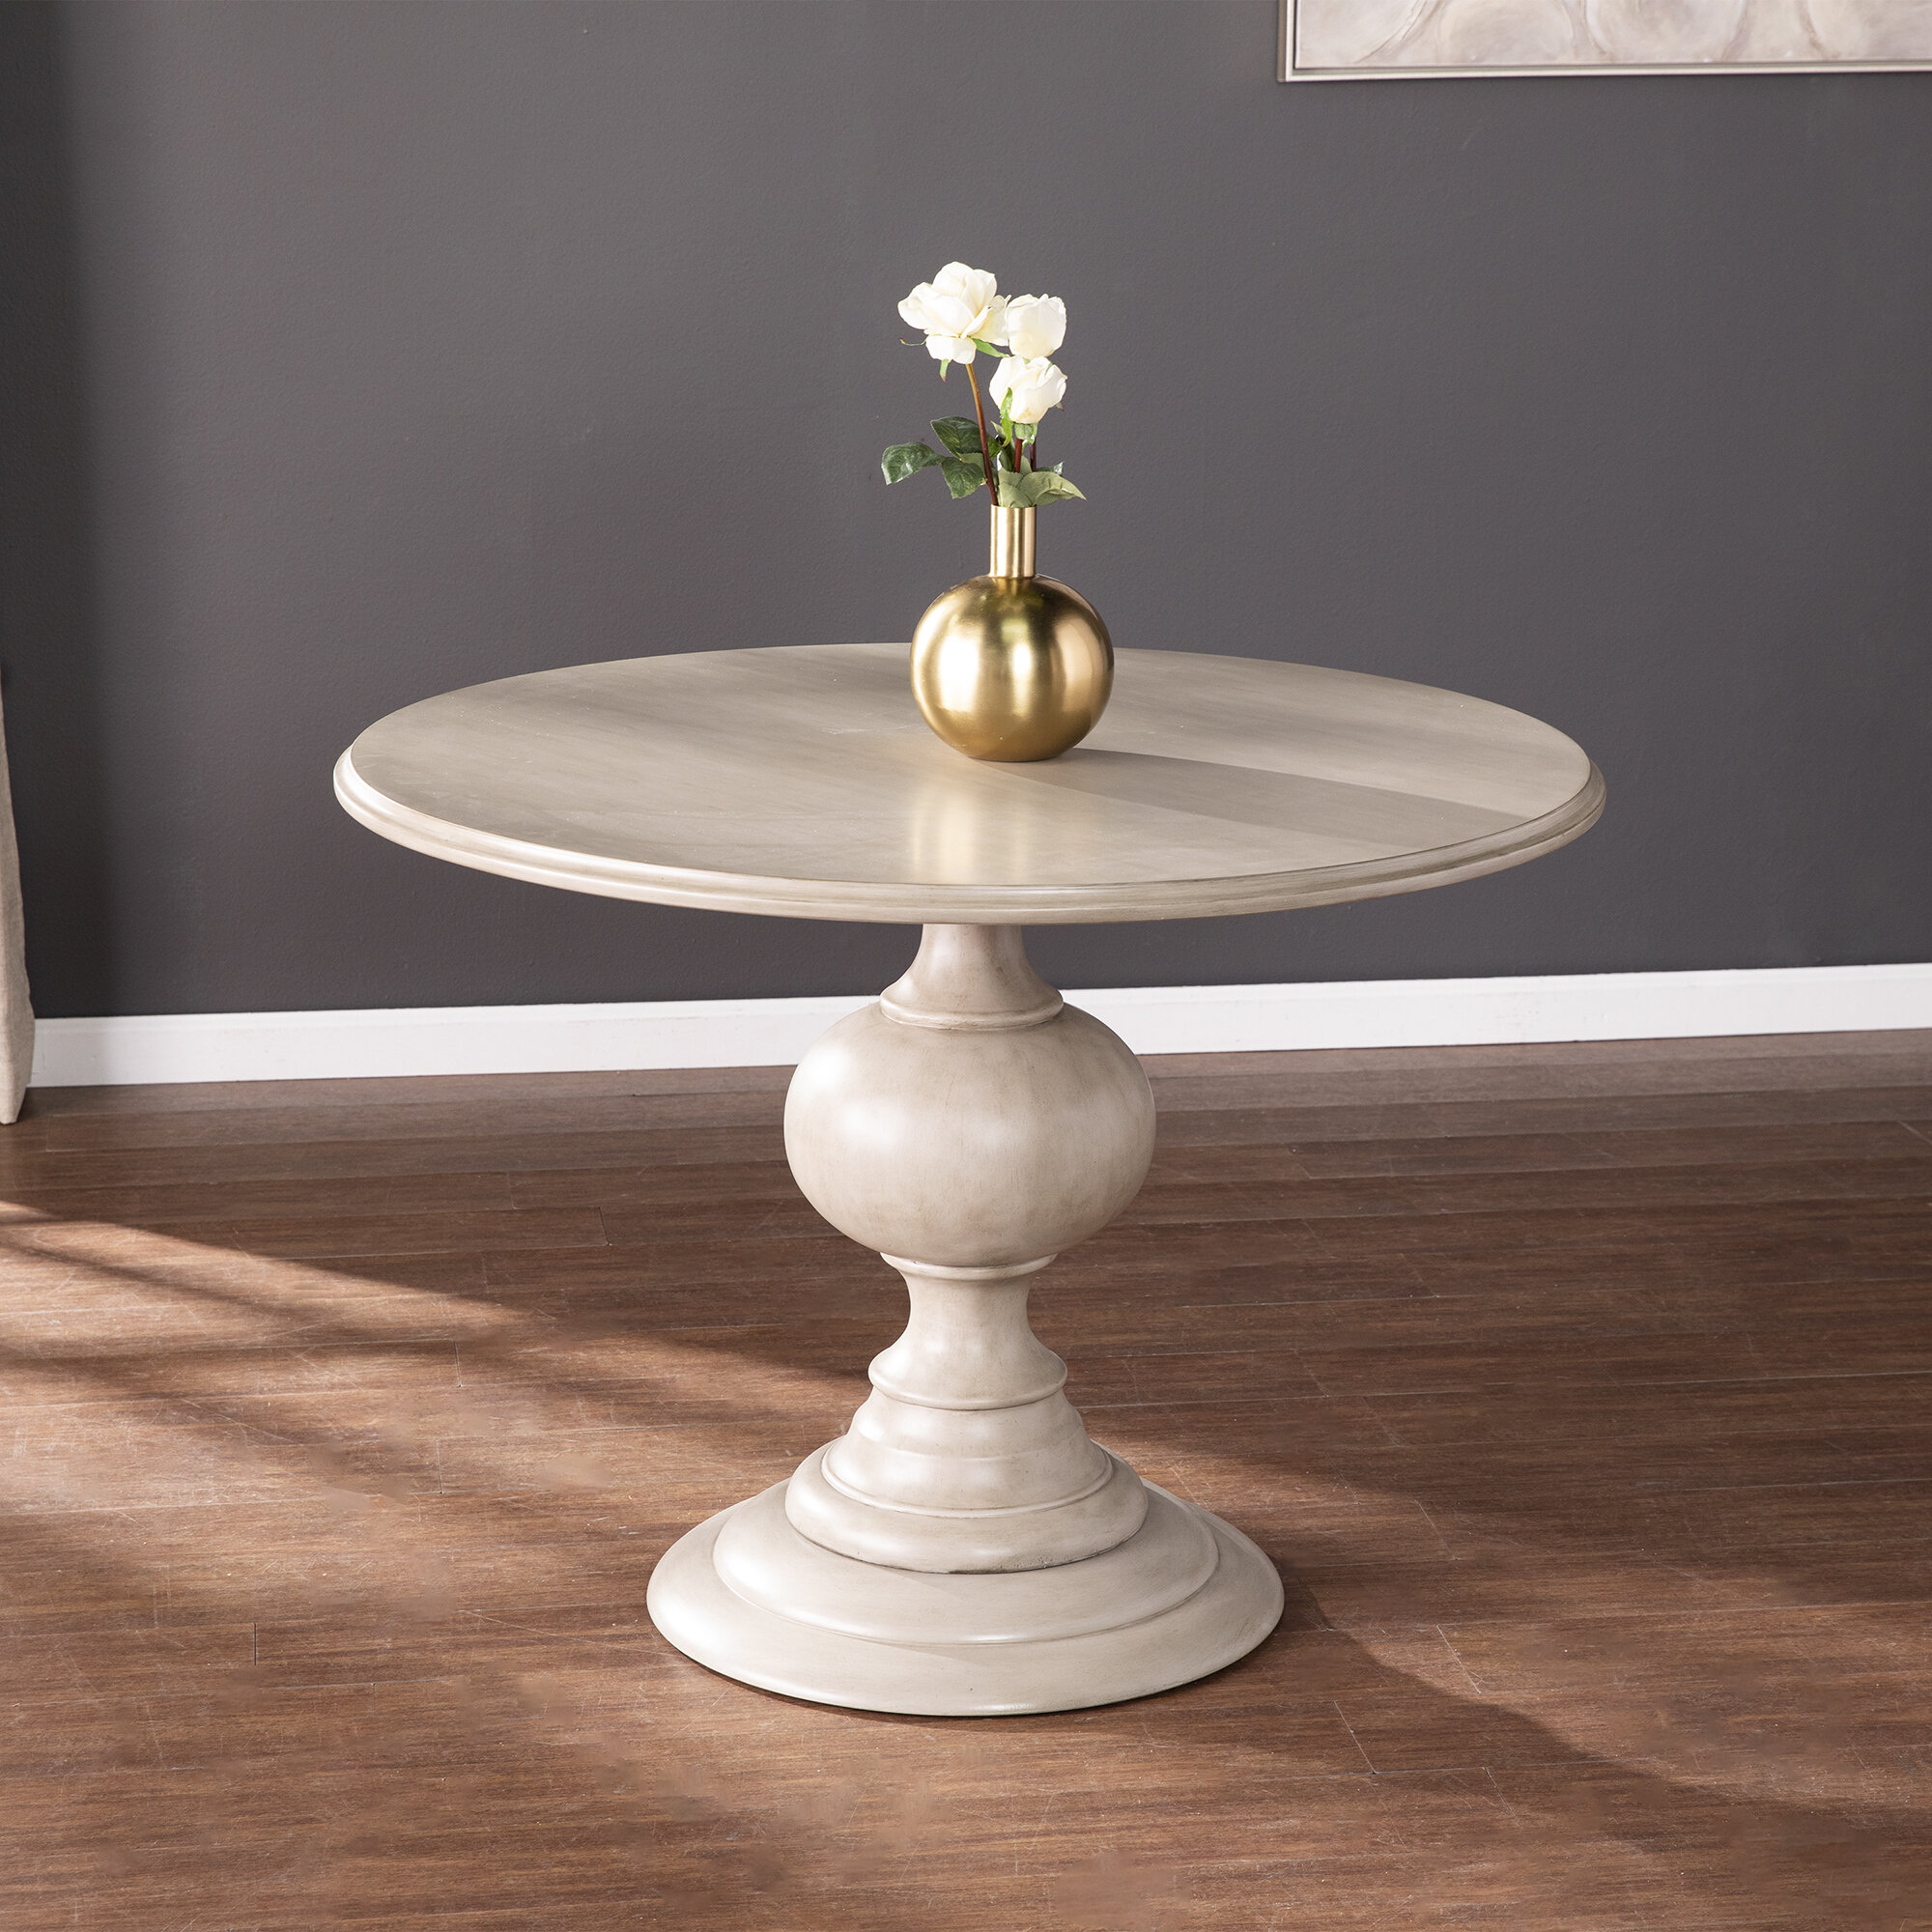 Ophelia Co Munsell 42 Pedestal Dining Table Reviews Wayfair